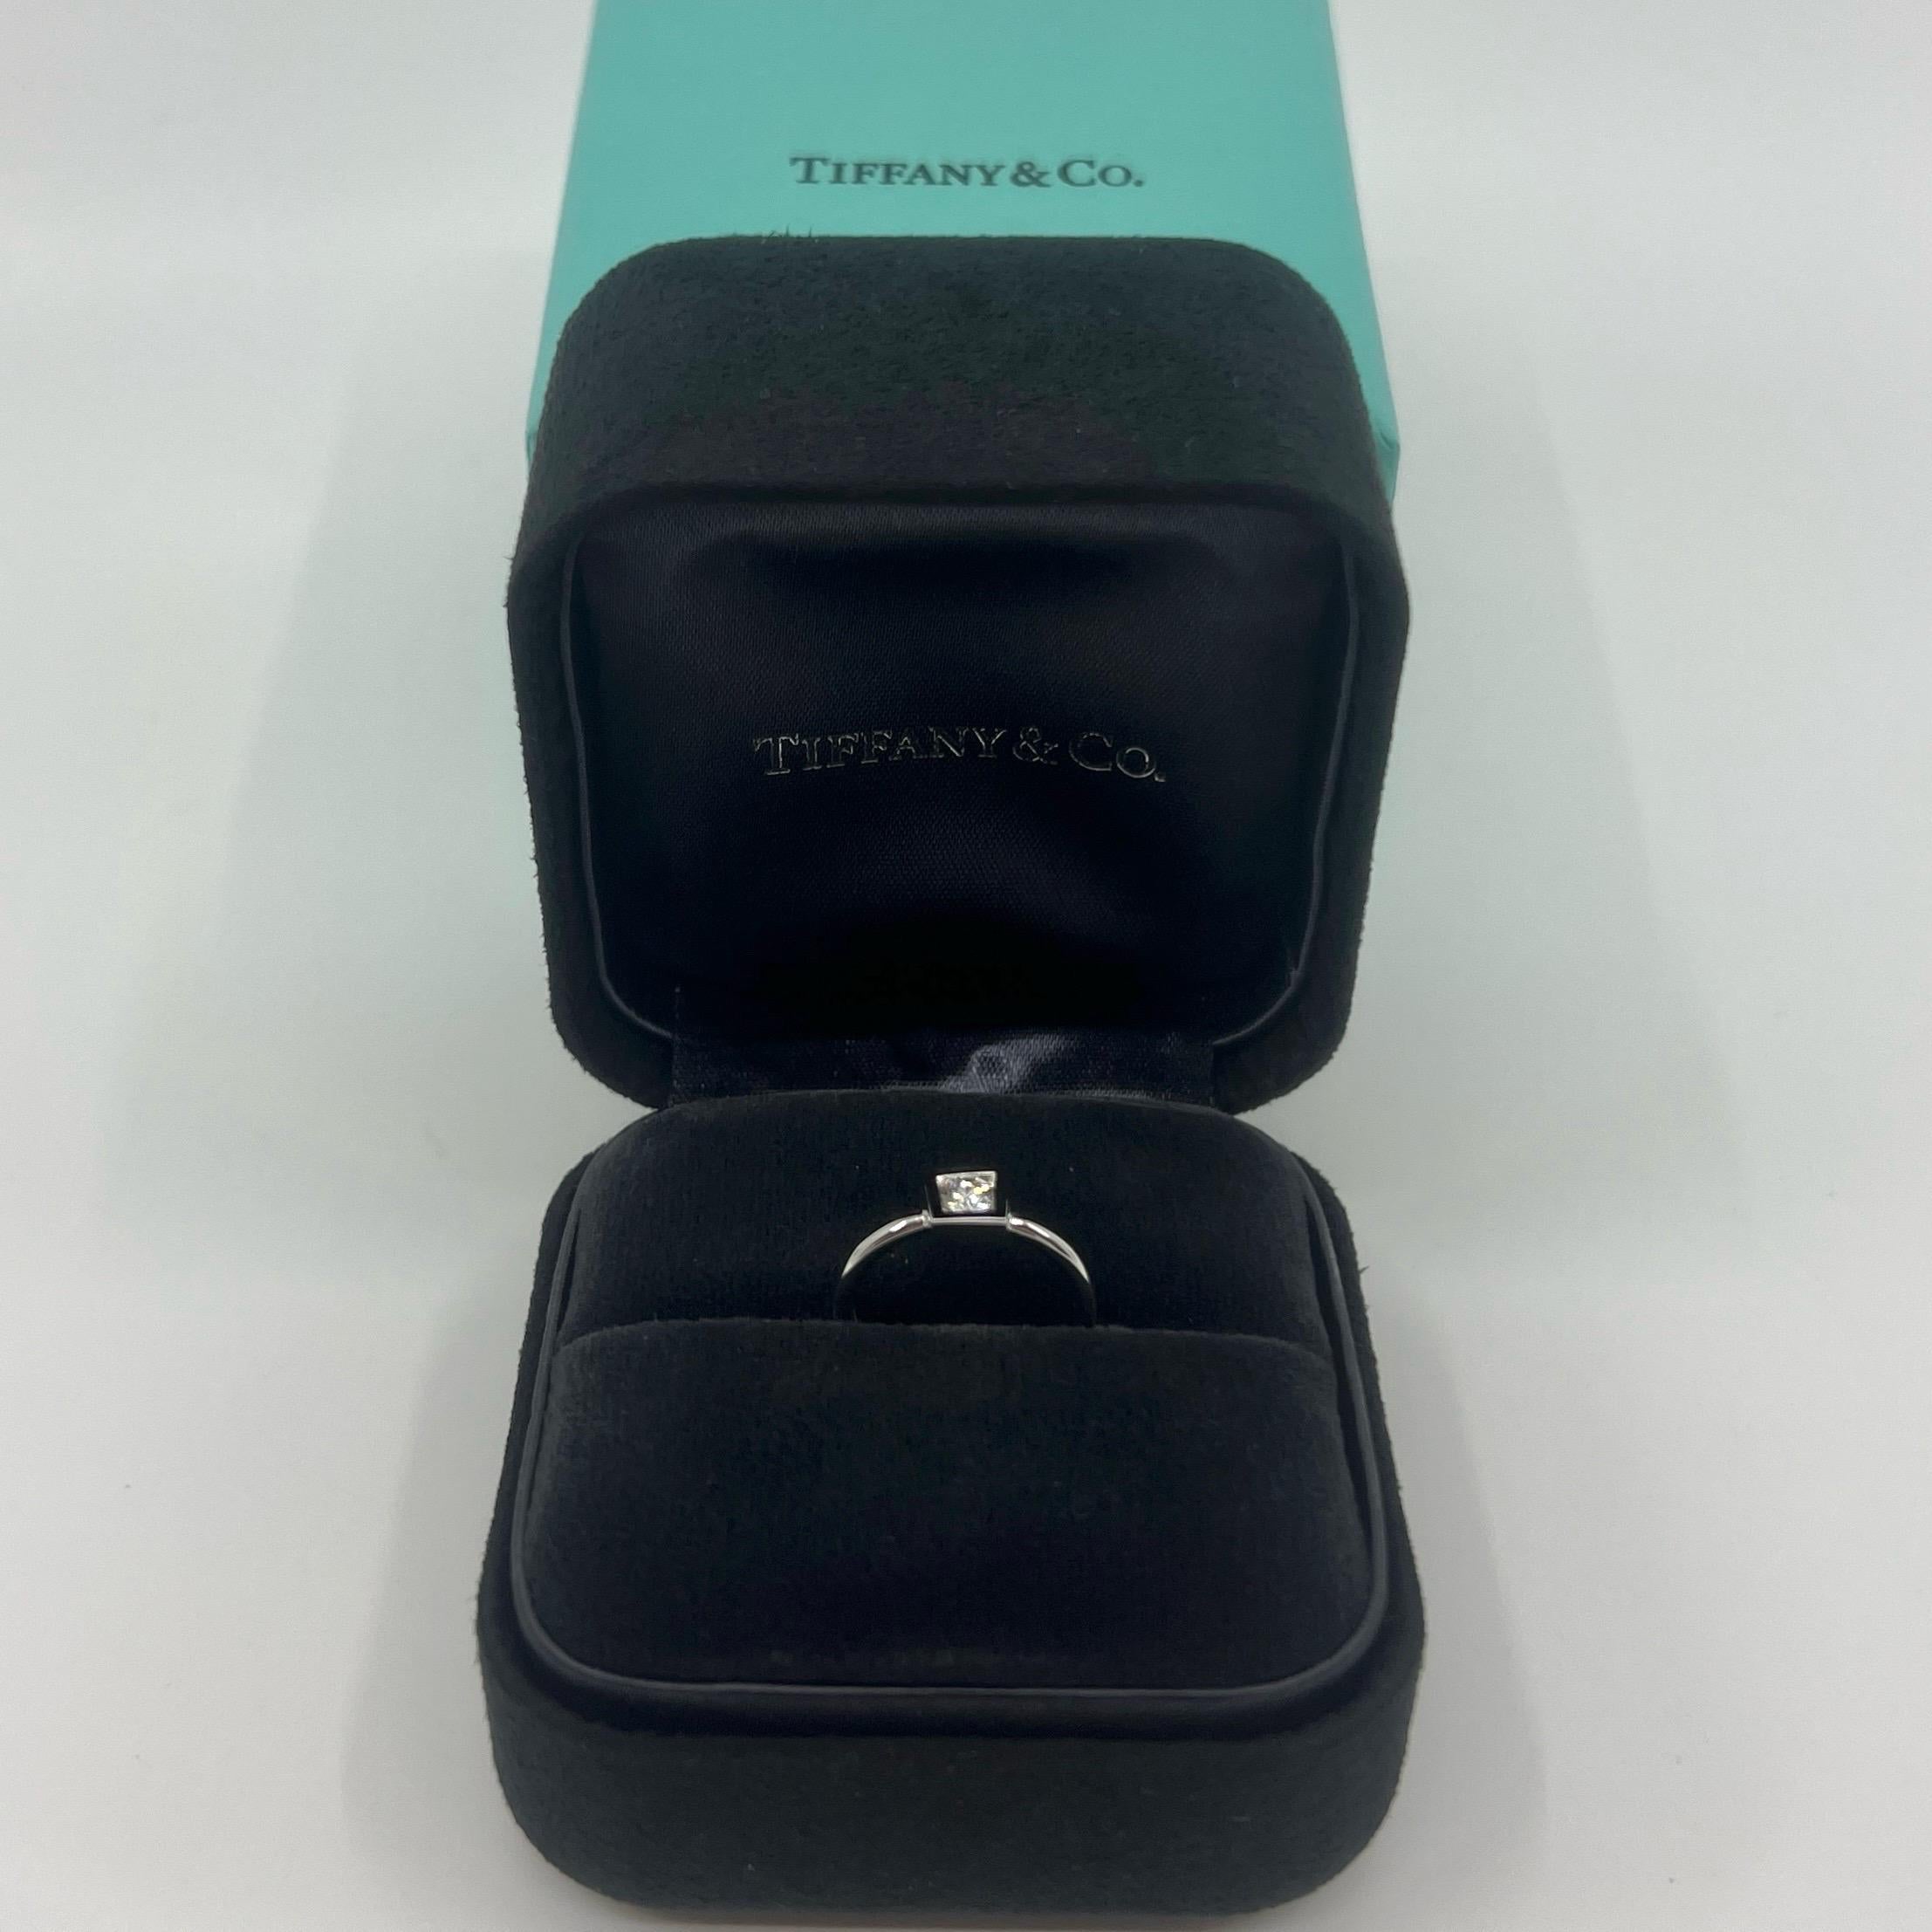 Vintage Tiffany & Co Frank Gehry Torque Round Diamond 18k White Gold Solitaire Ring.

A rare piece from the Tiffany & Co collaboration with renowned architect Frank Gehry.

This piece features a 3.5mm 0.20ct natural round brilliant cut diamond set